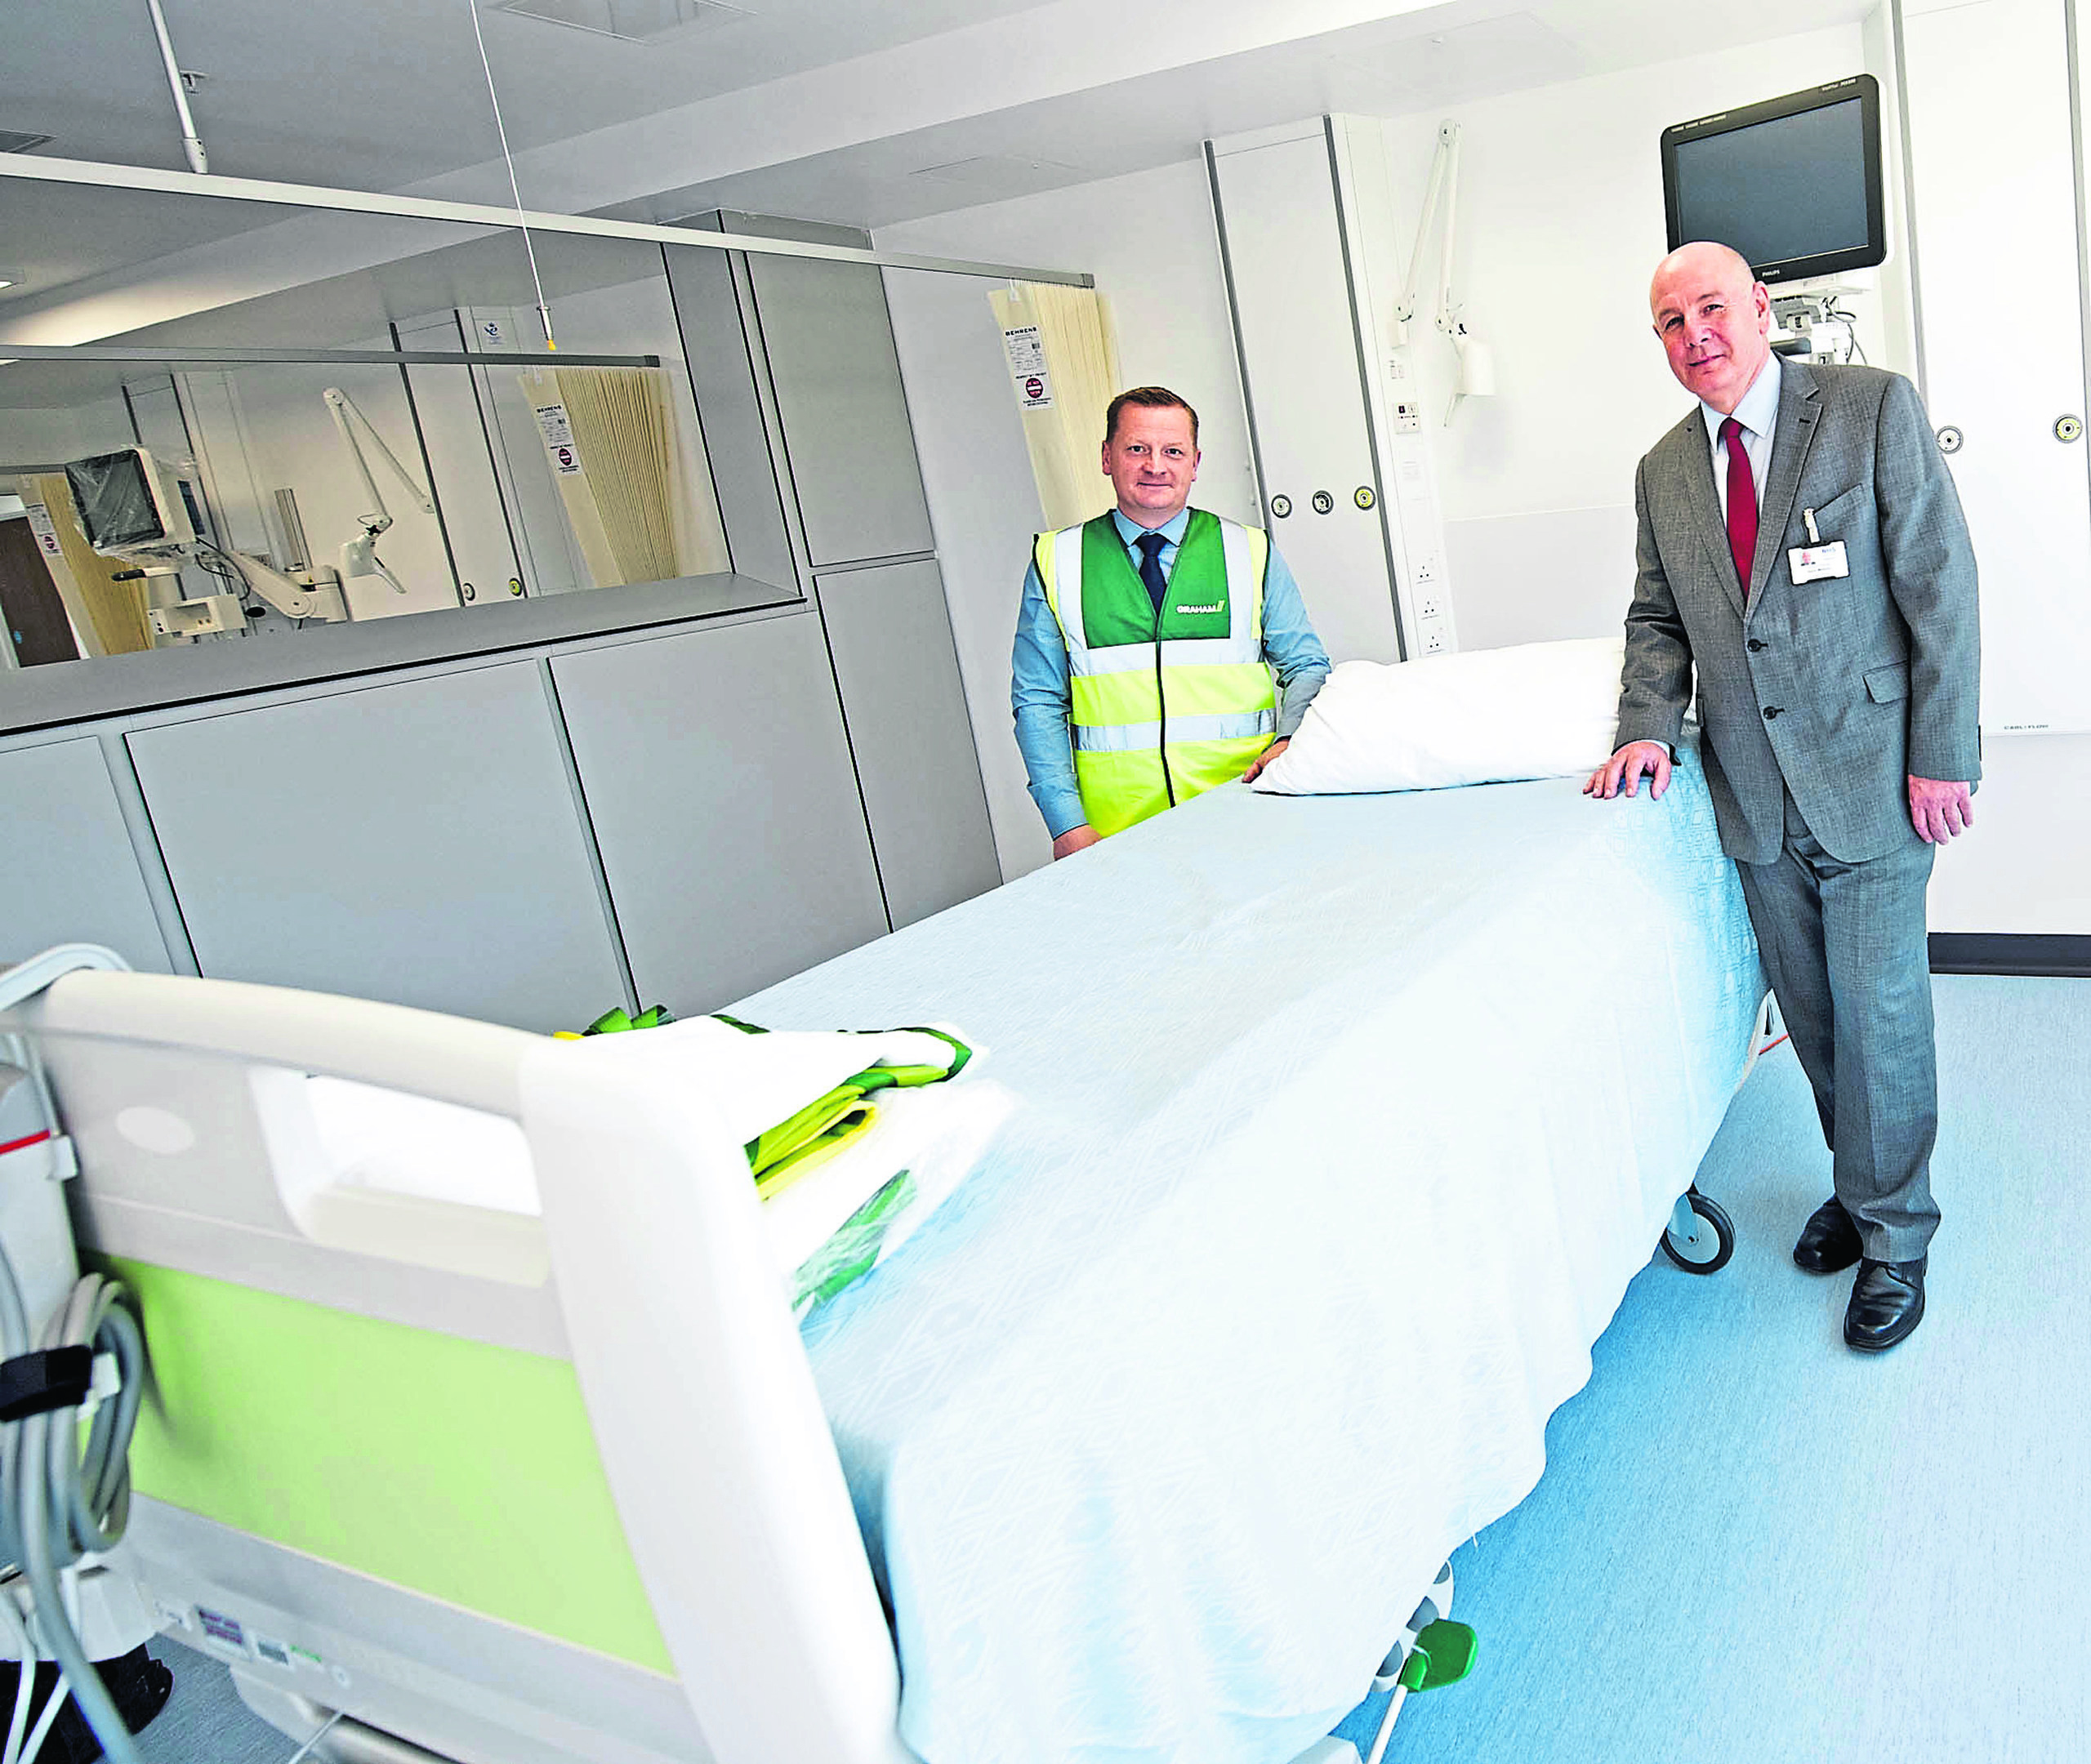 Kevin Minnock, Project Director NHS (right) with Pat O'Hare, contract director of Grahams, at one of the rooms at the new development at Raigmore.